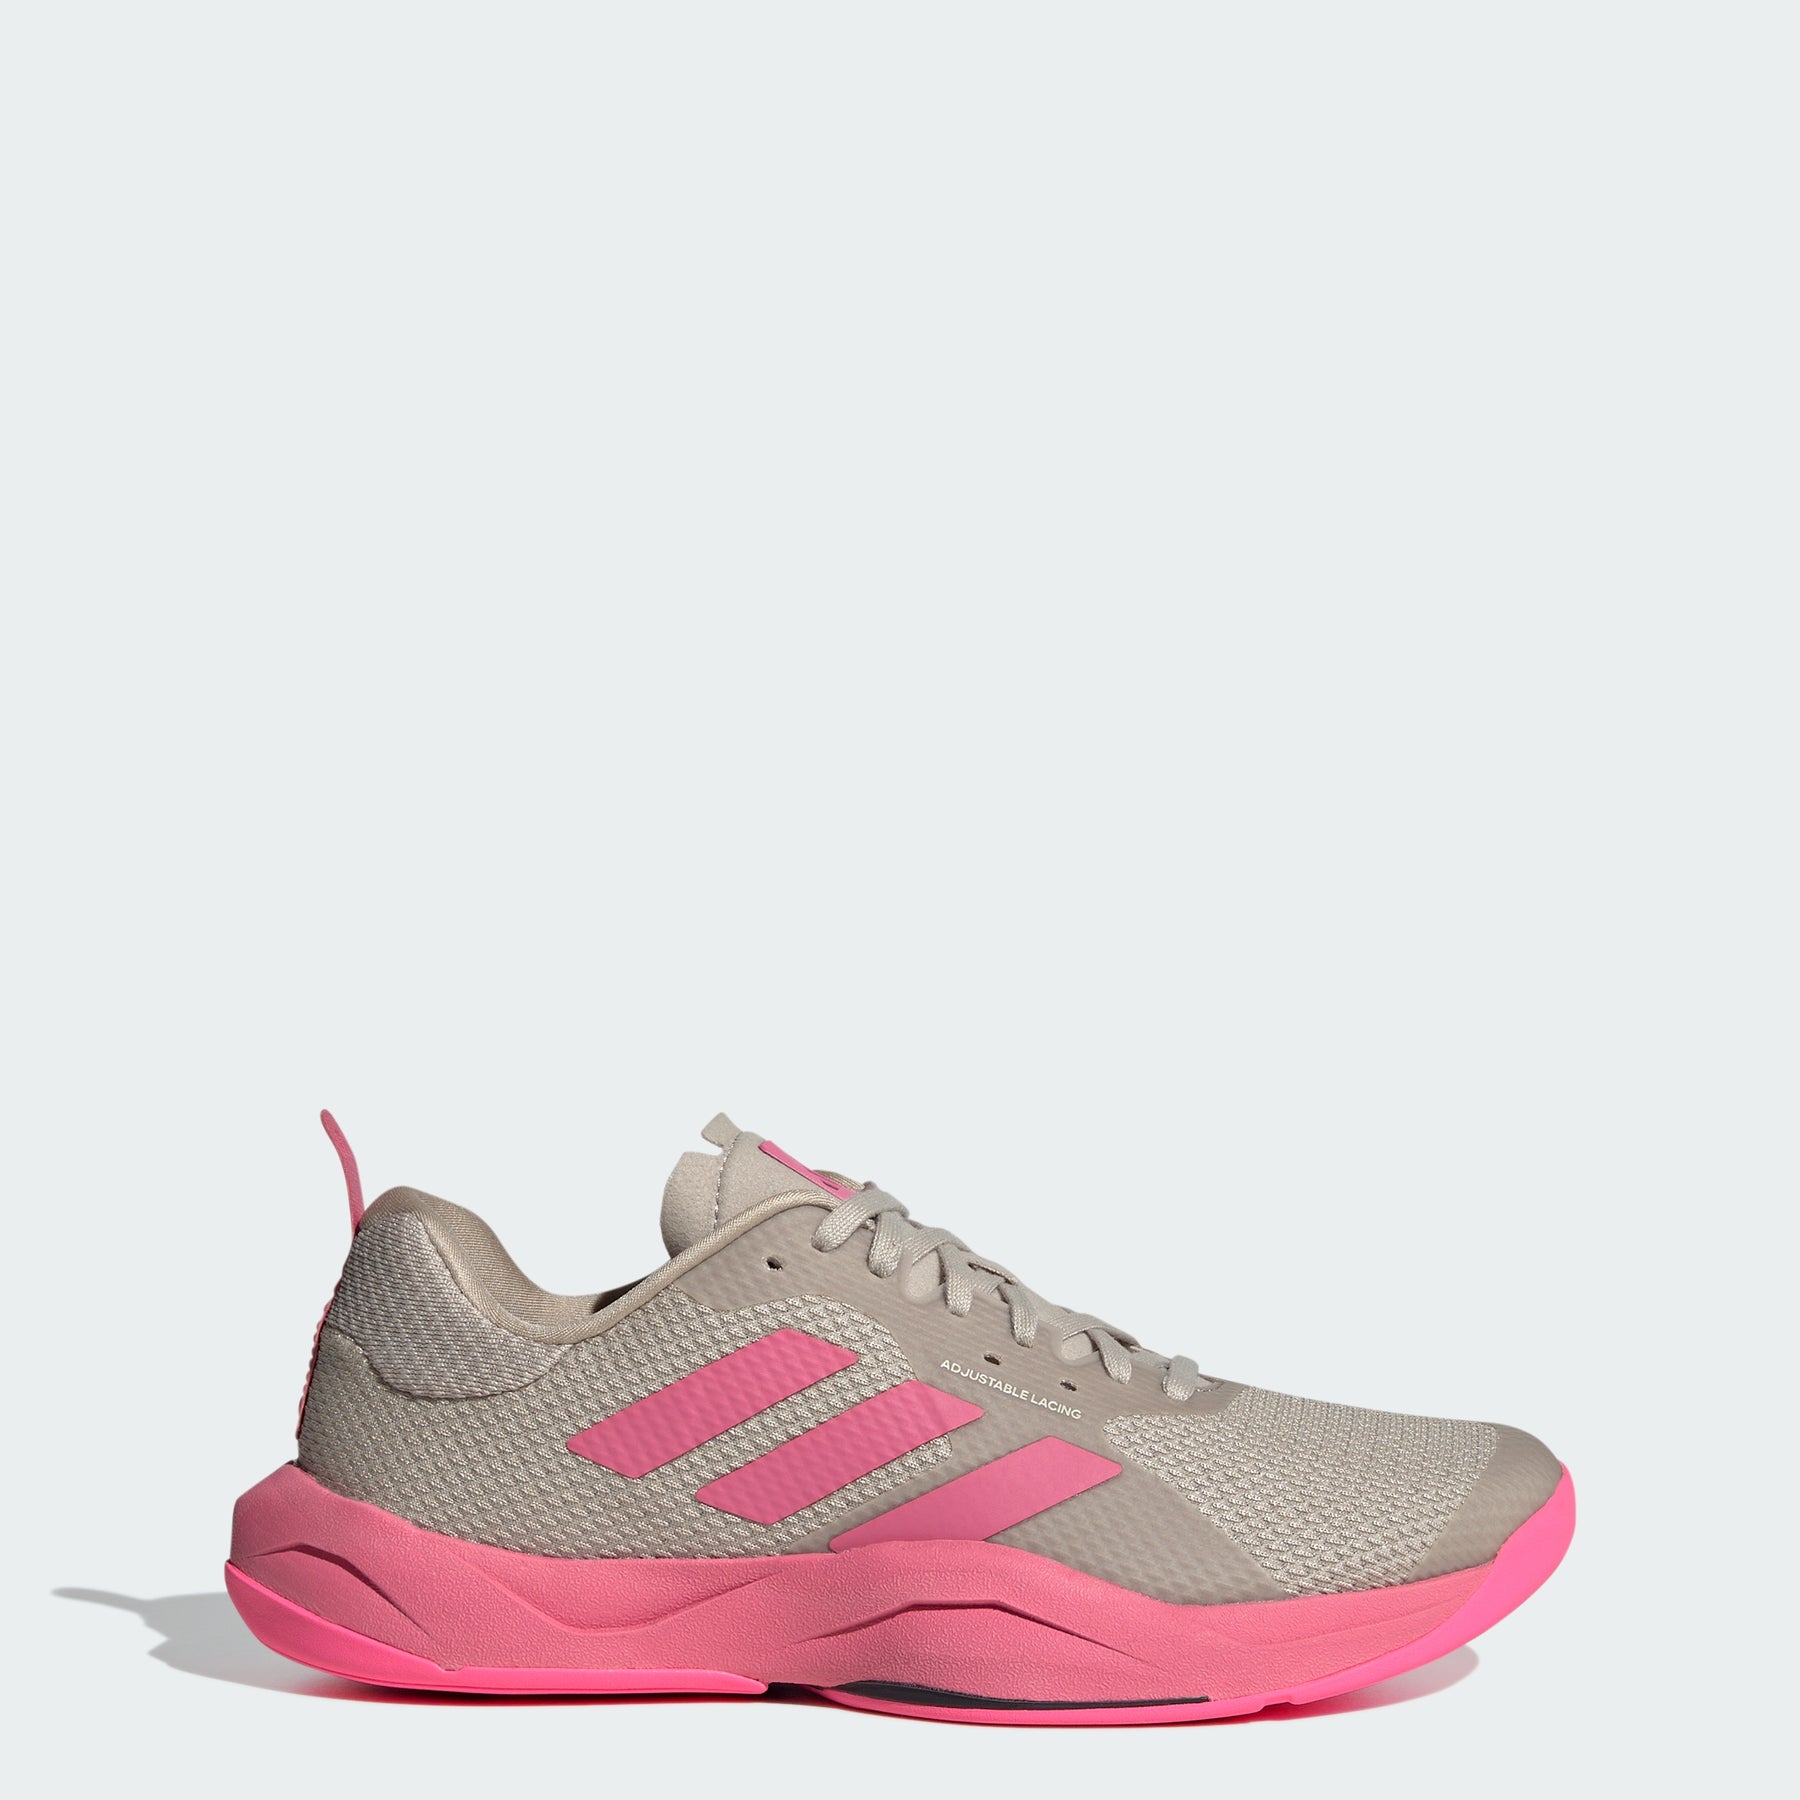 adidas Women's Rapidmove Trainer Shoes (Beige/Pink) $42 + Free Shipping